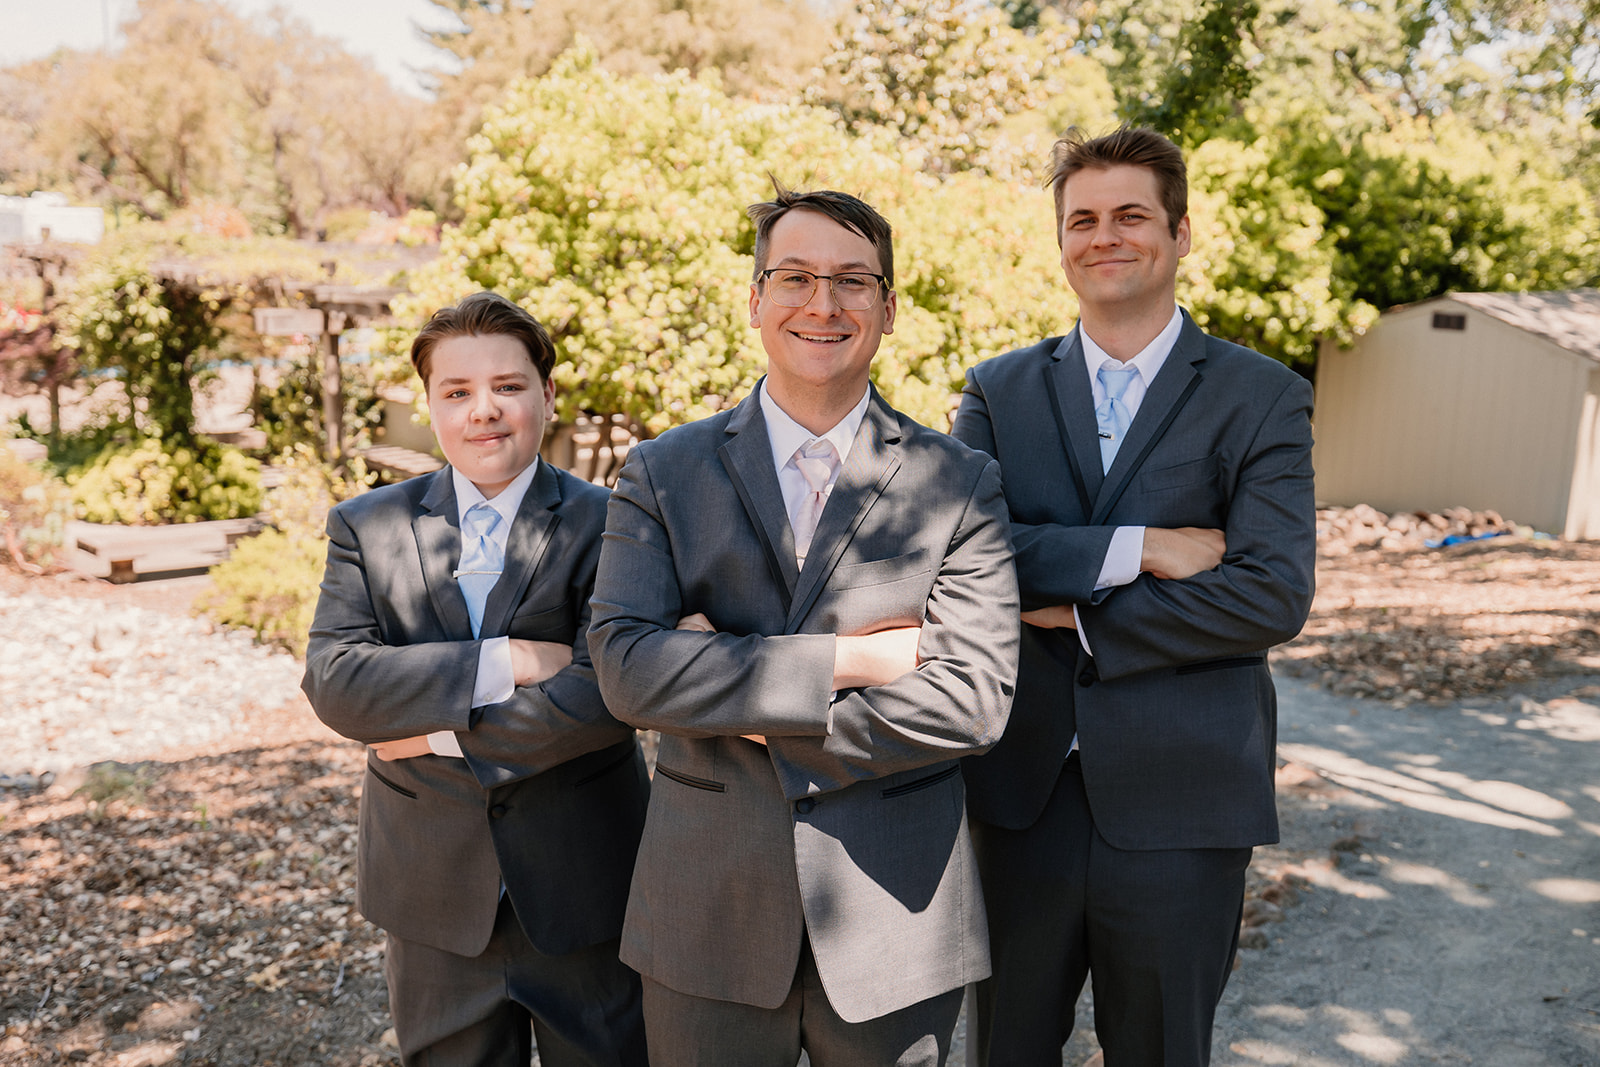 Three people in suits stand outdoors on a sunny day, 